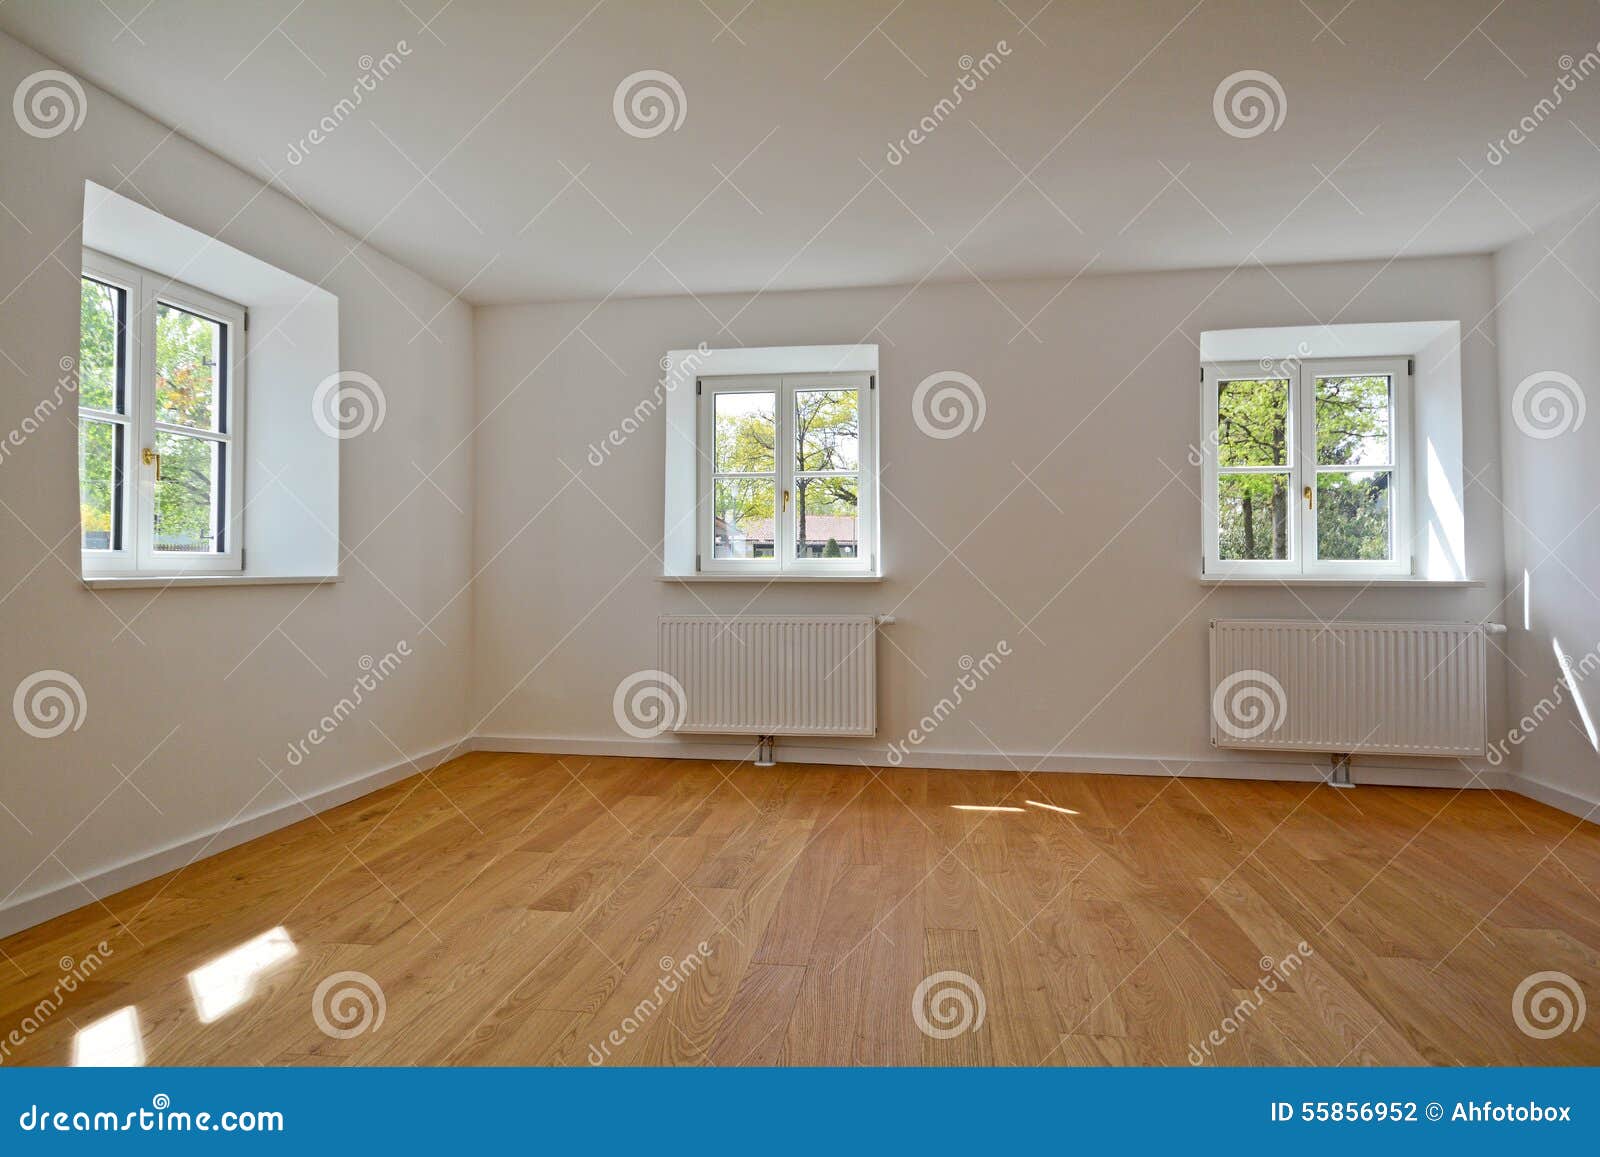 living room in an old building - apartment with wooden windows and parquet flooring after renovation